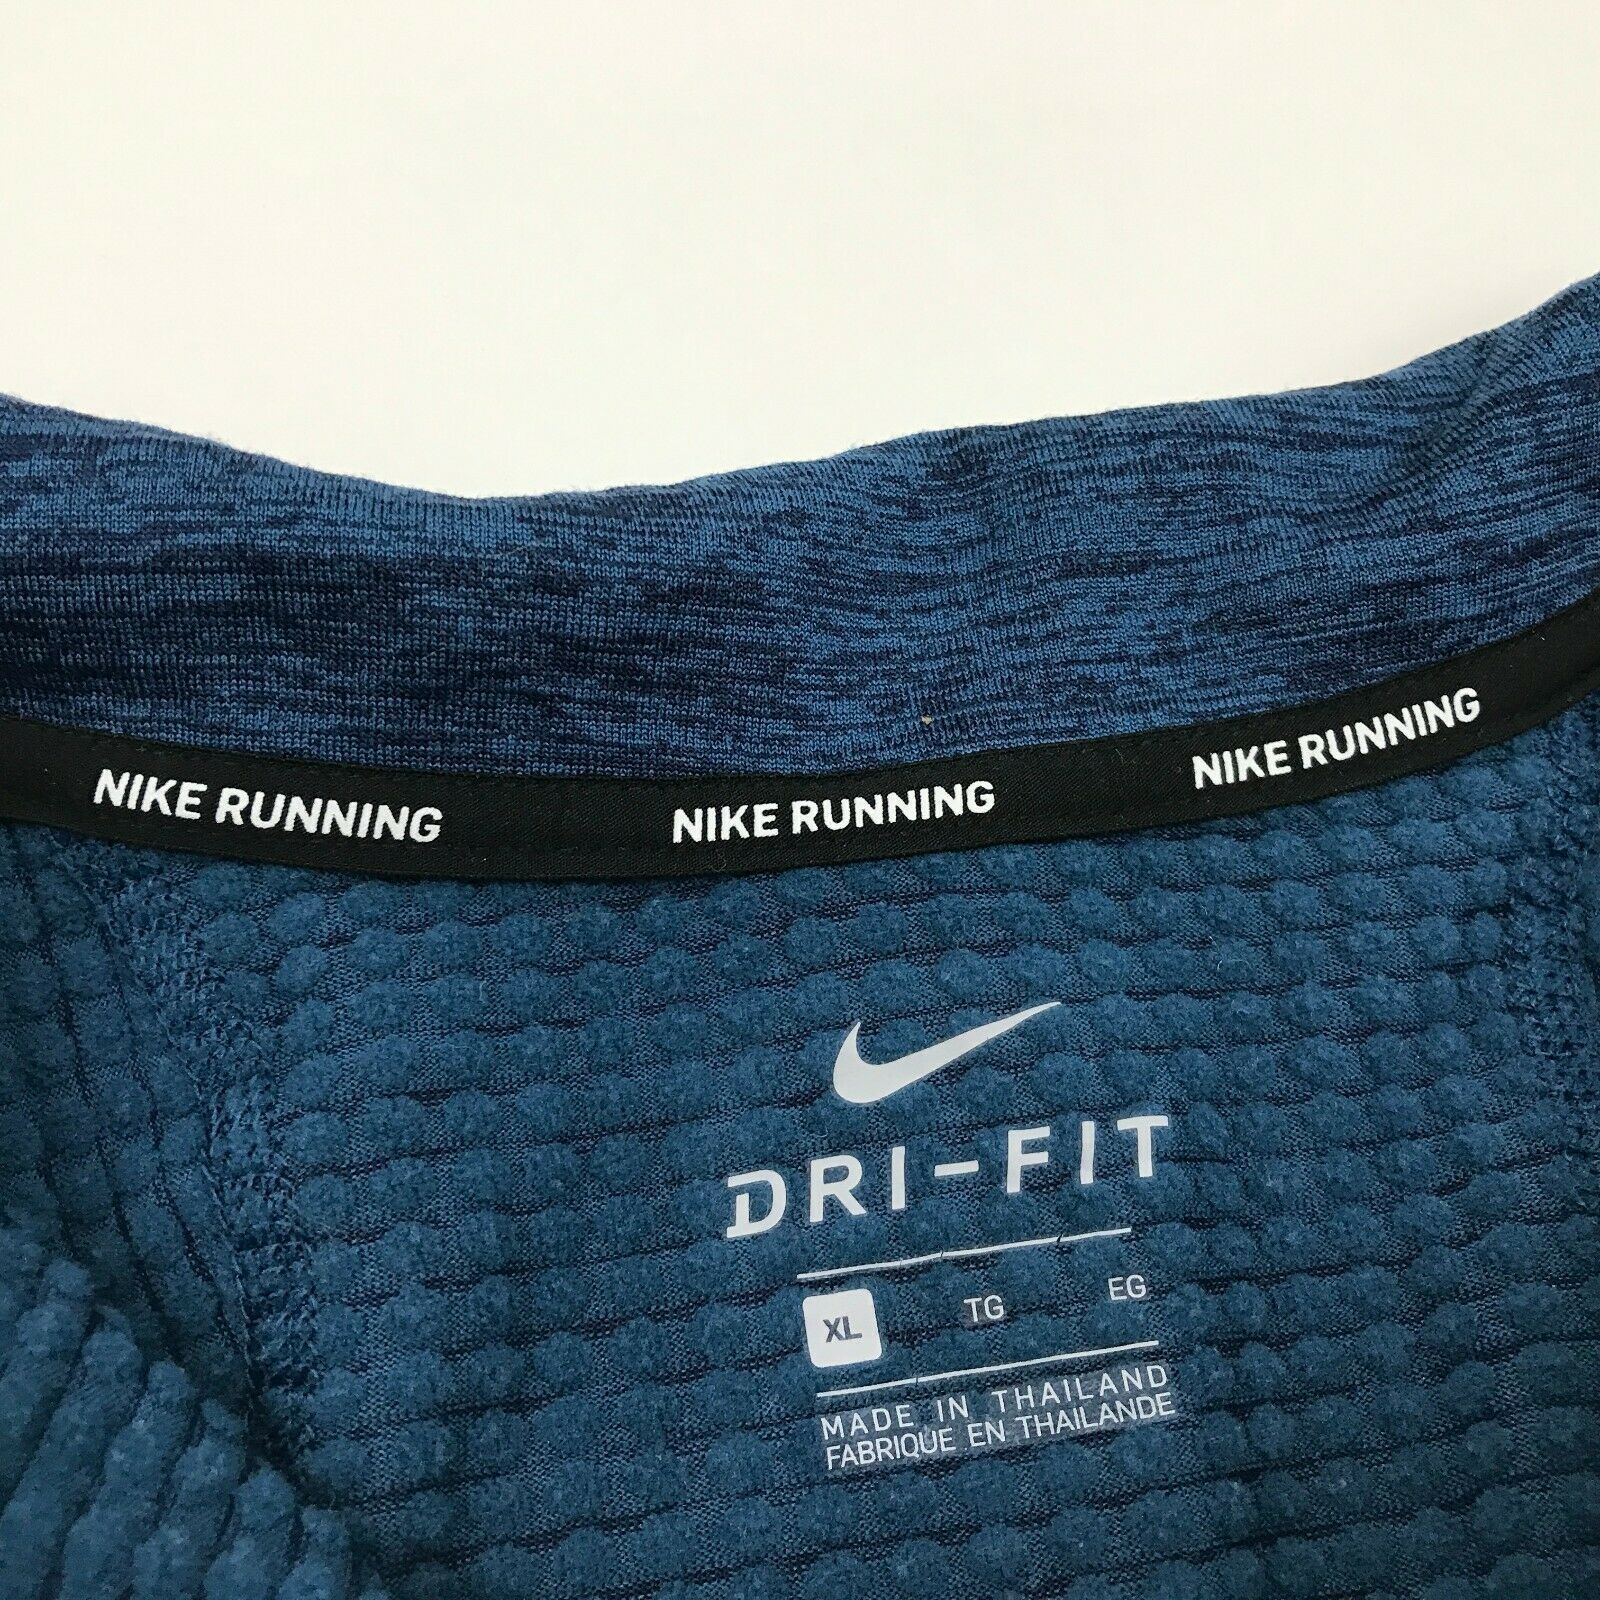 NIKE RUNNING Thermal Long Sleeve Dry Fit Shirt Men's Size Extra Large Zip Pocket - Activewear Tops